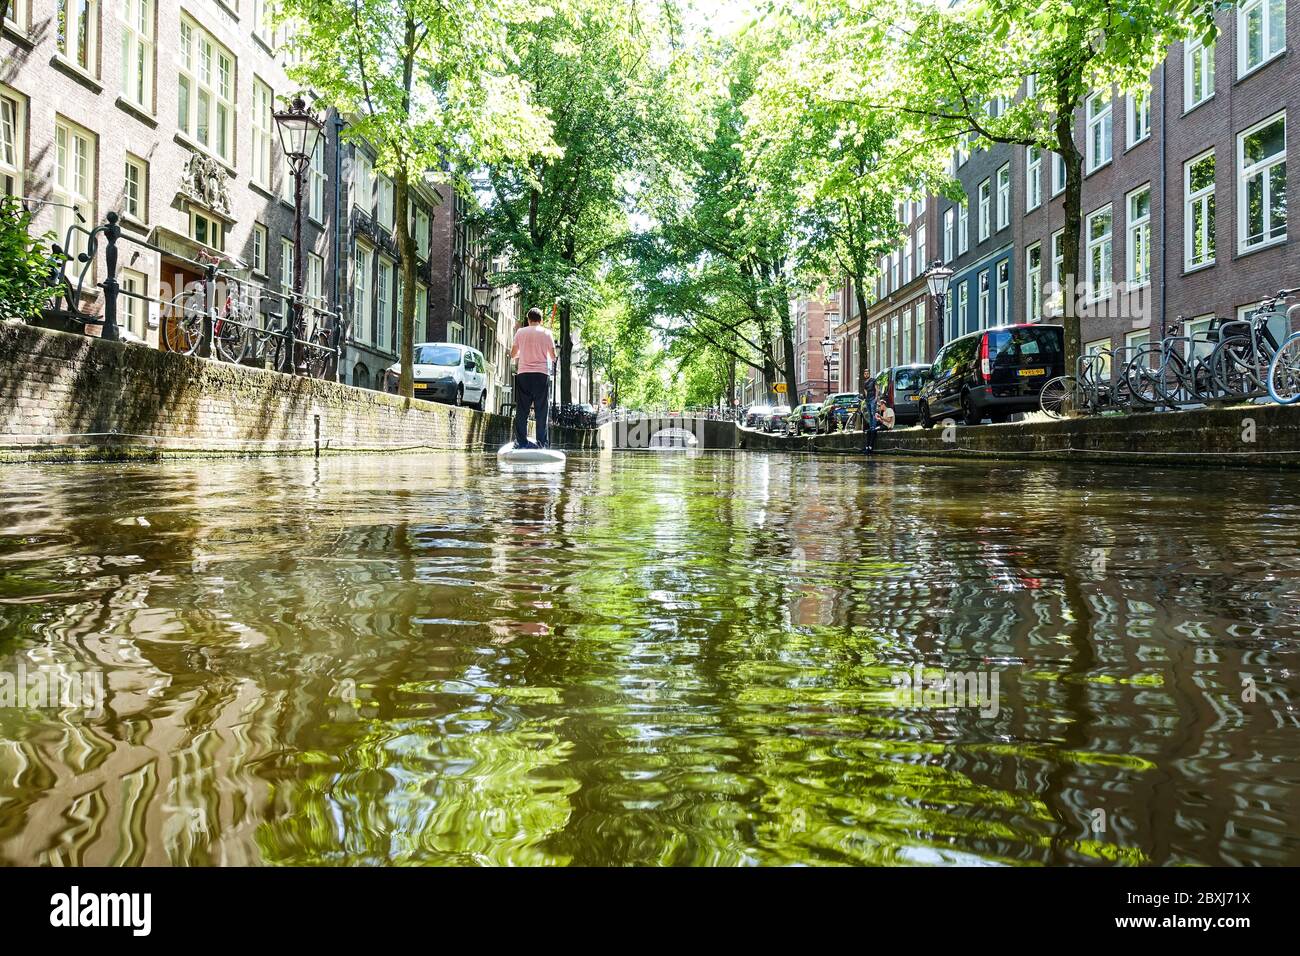 Man on a SUP (stand-up paddle board) on the canals in the center of quiet Amsterdam (Netherlands) during the Covid-19 crisis Stock Photo